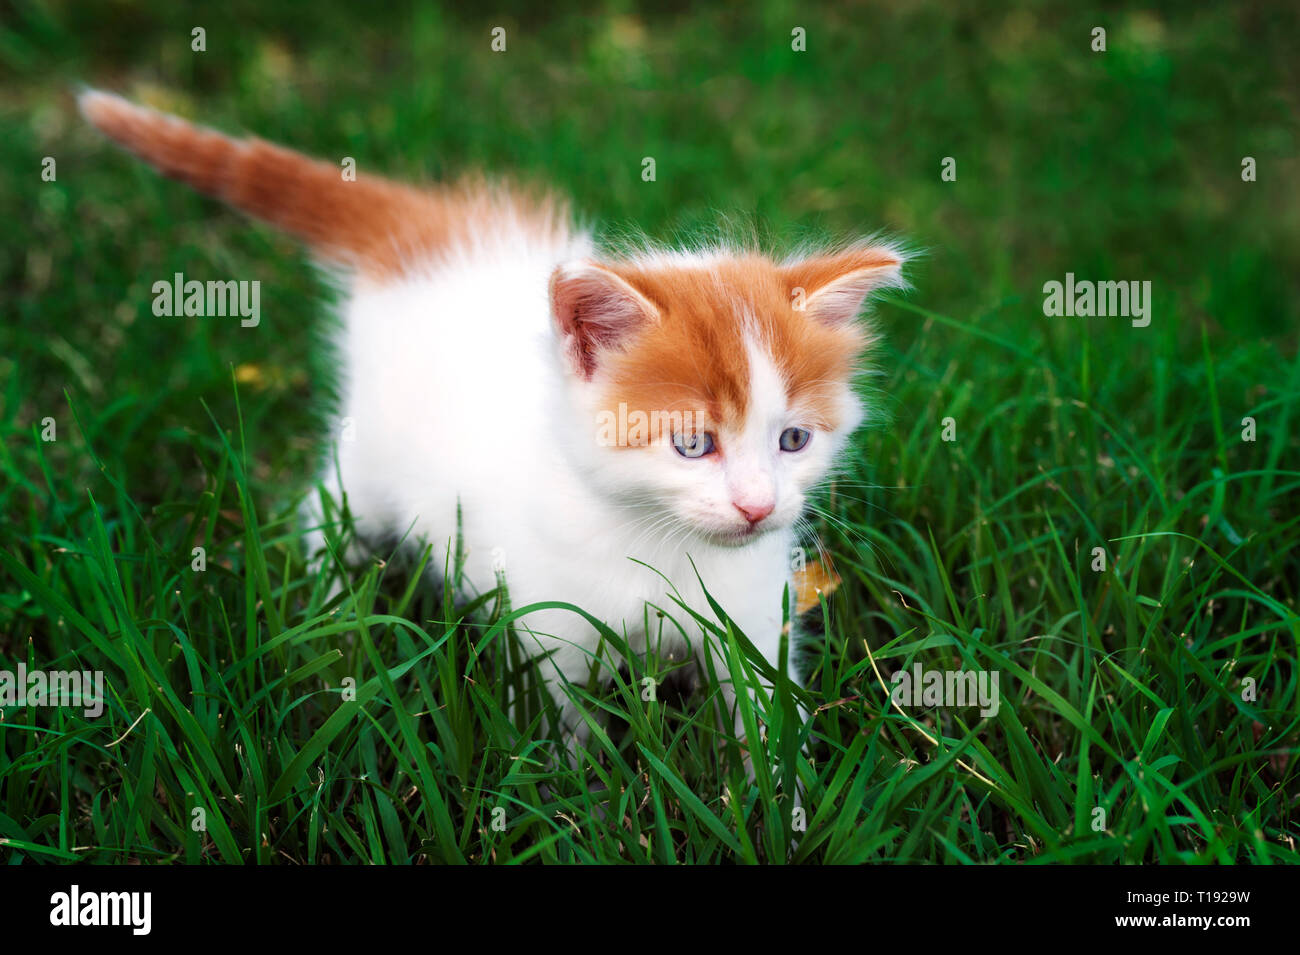 A beautiful white and red kitten is walking through lush green grass Stock Photo